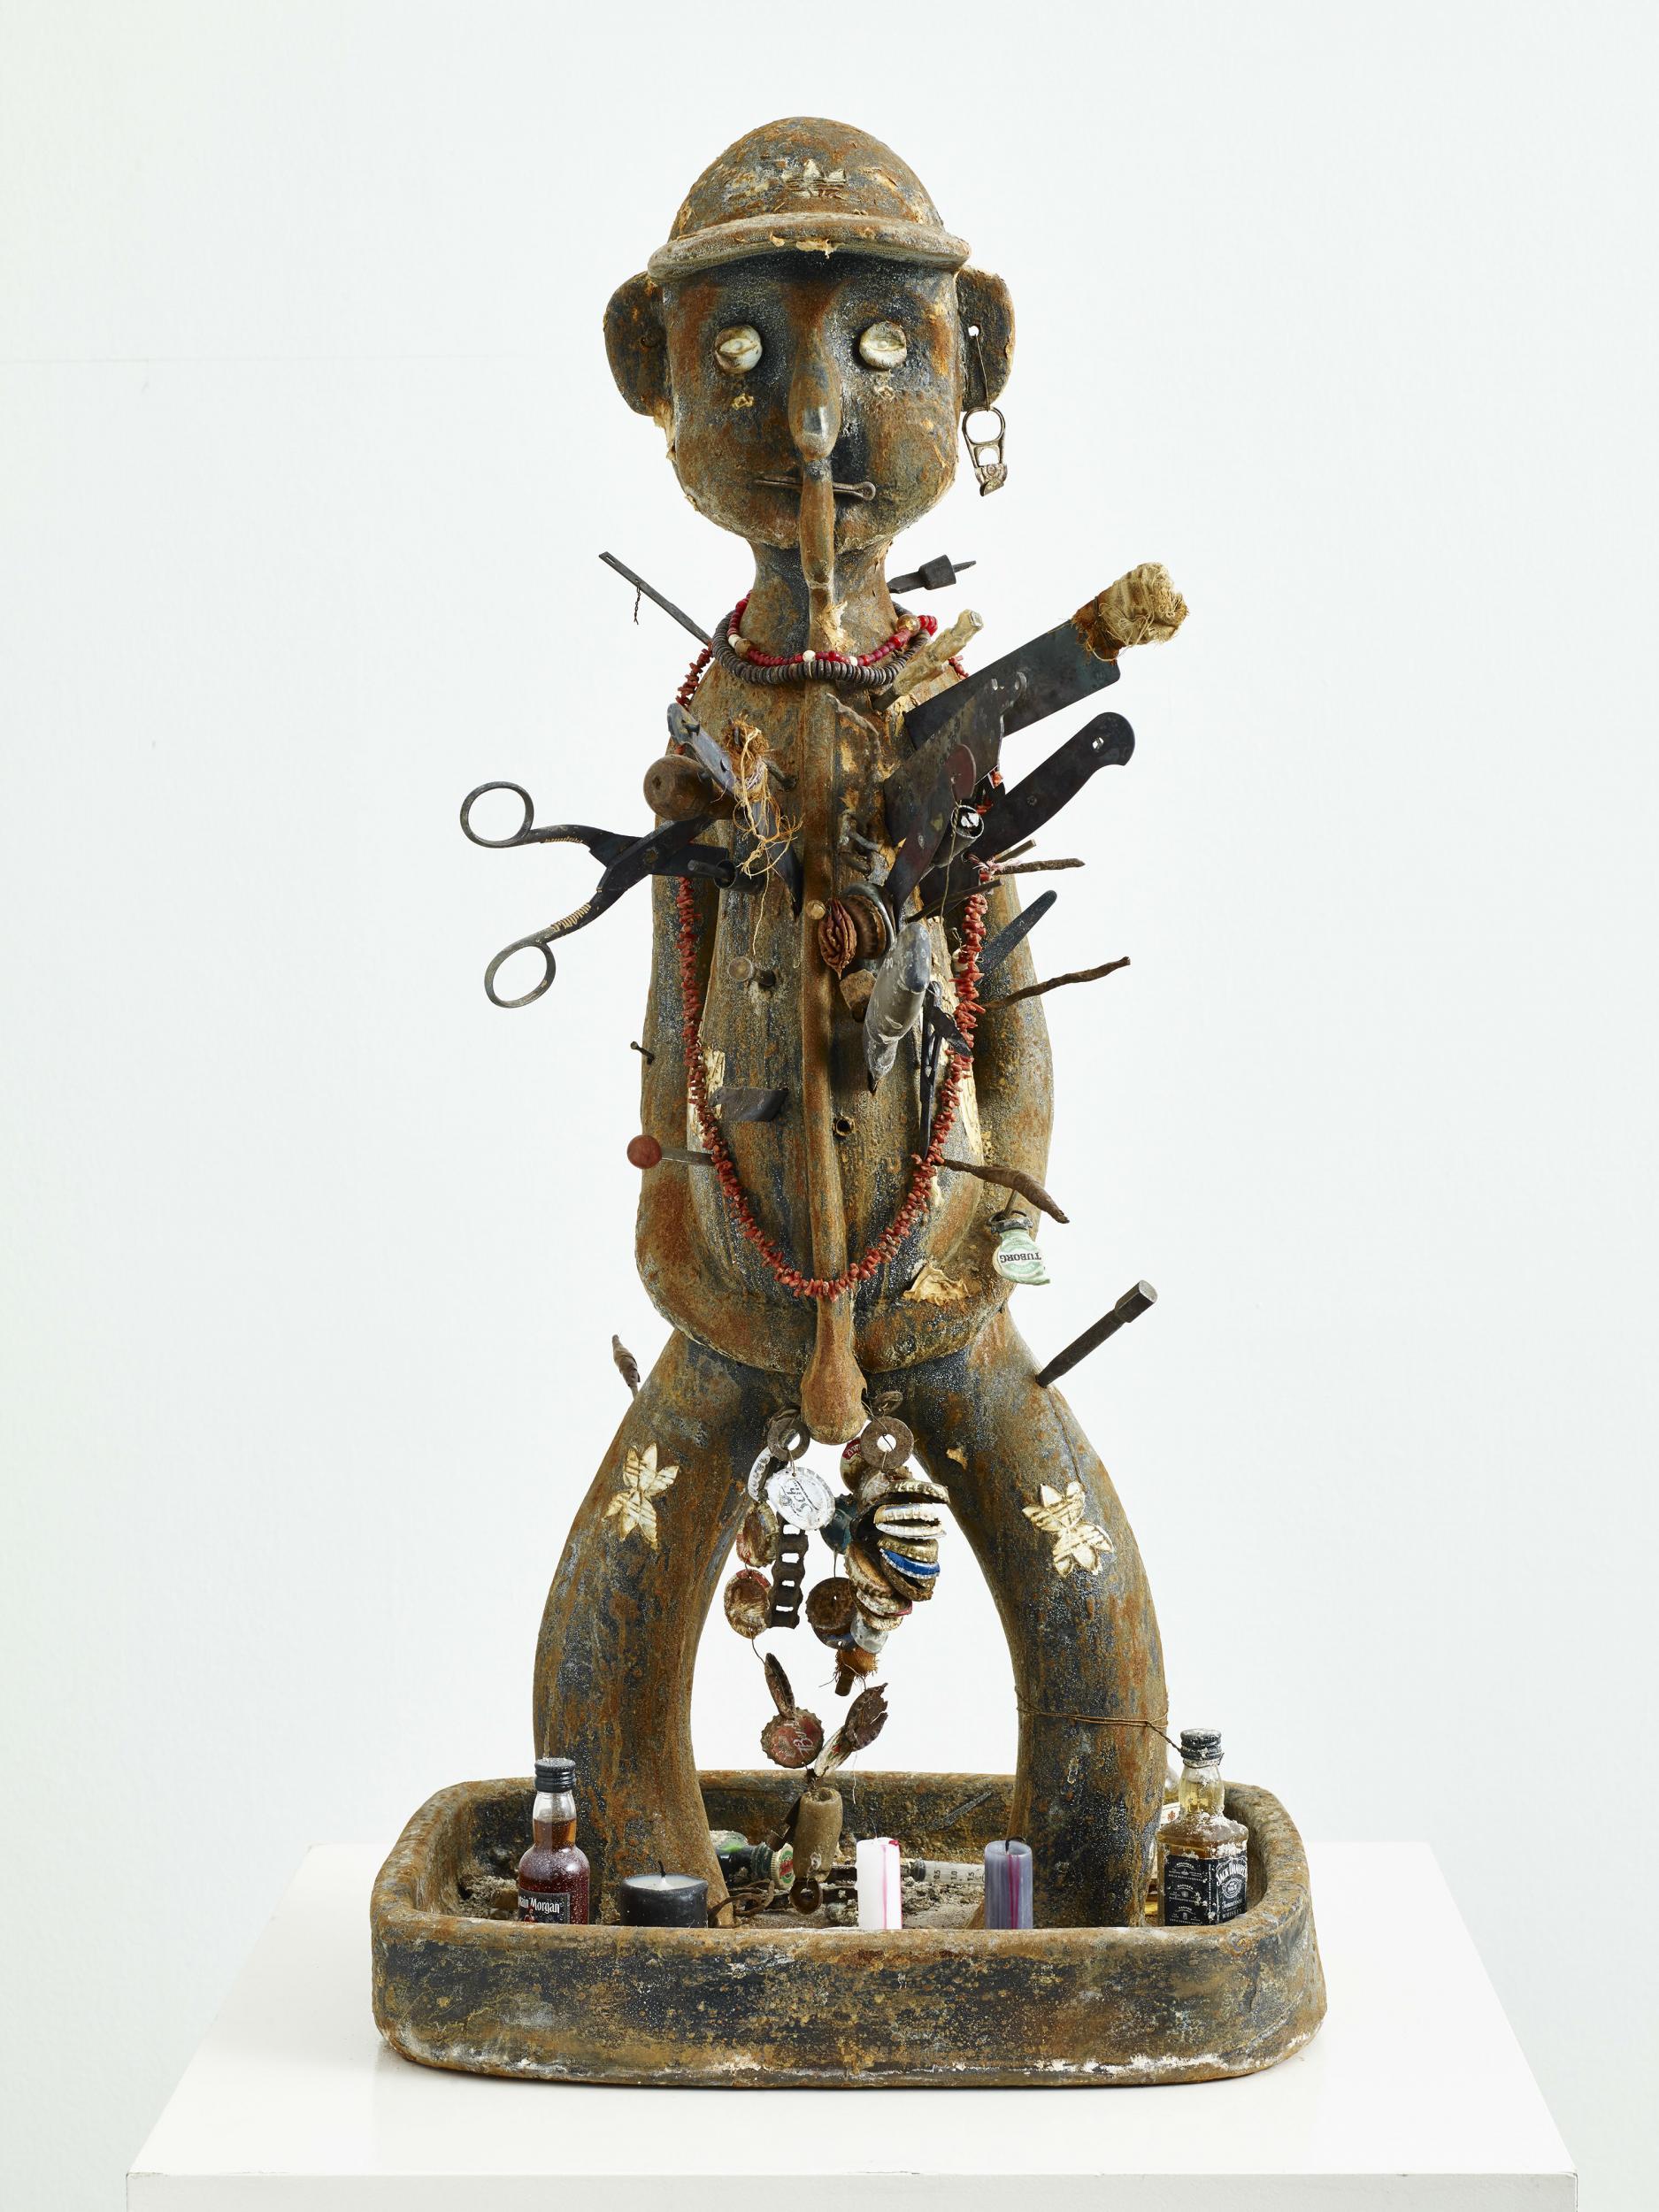 Grayson Perry, 'King of Nowhere', 2015, Cast iron and mixed media